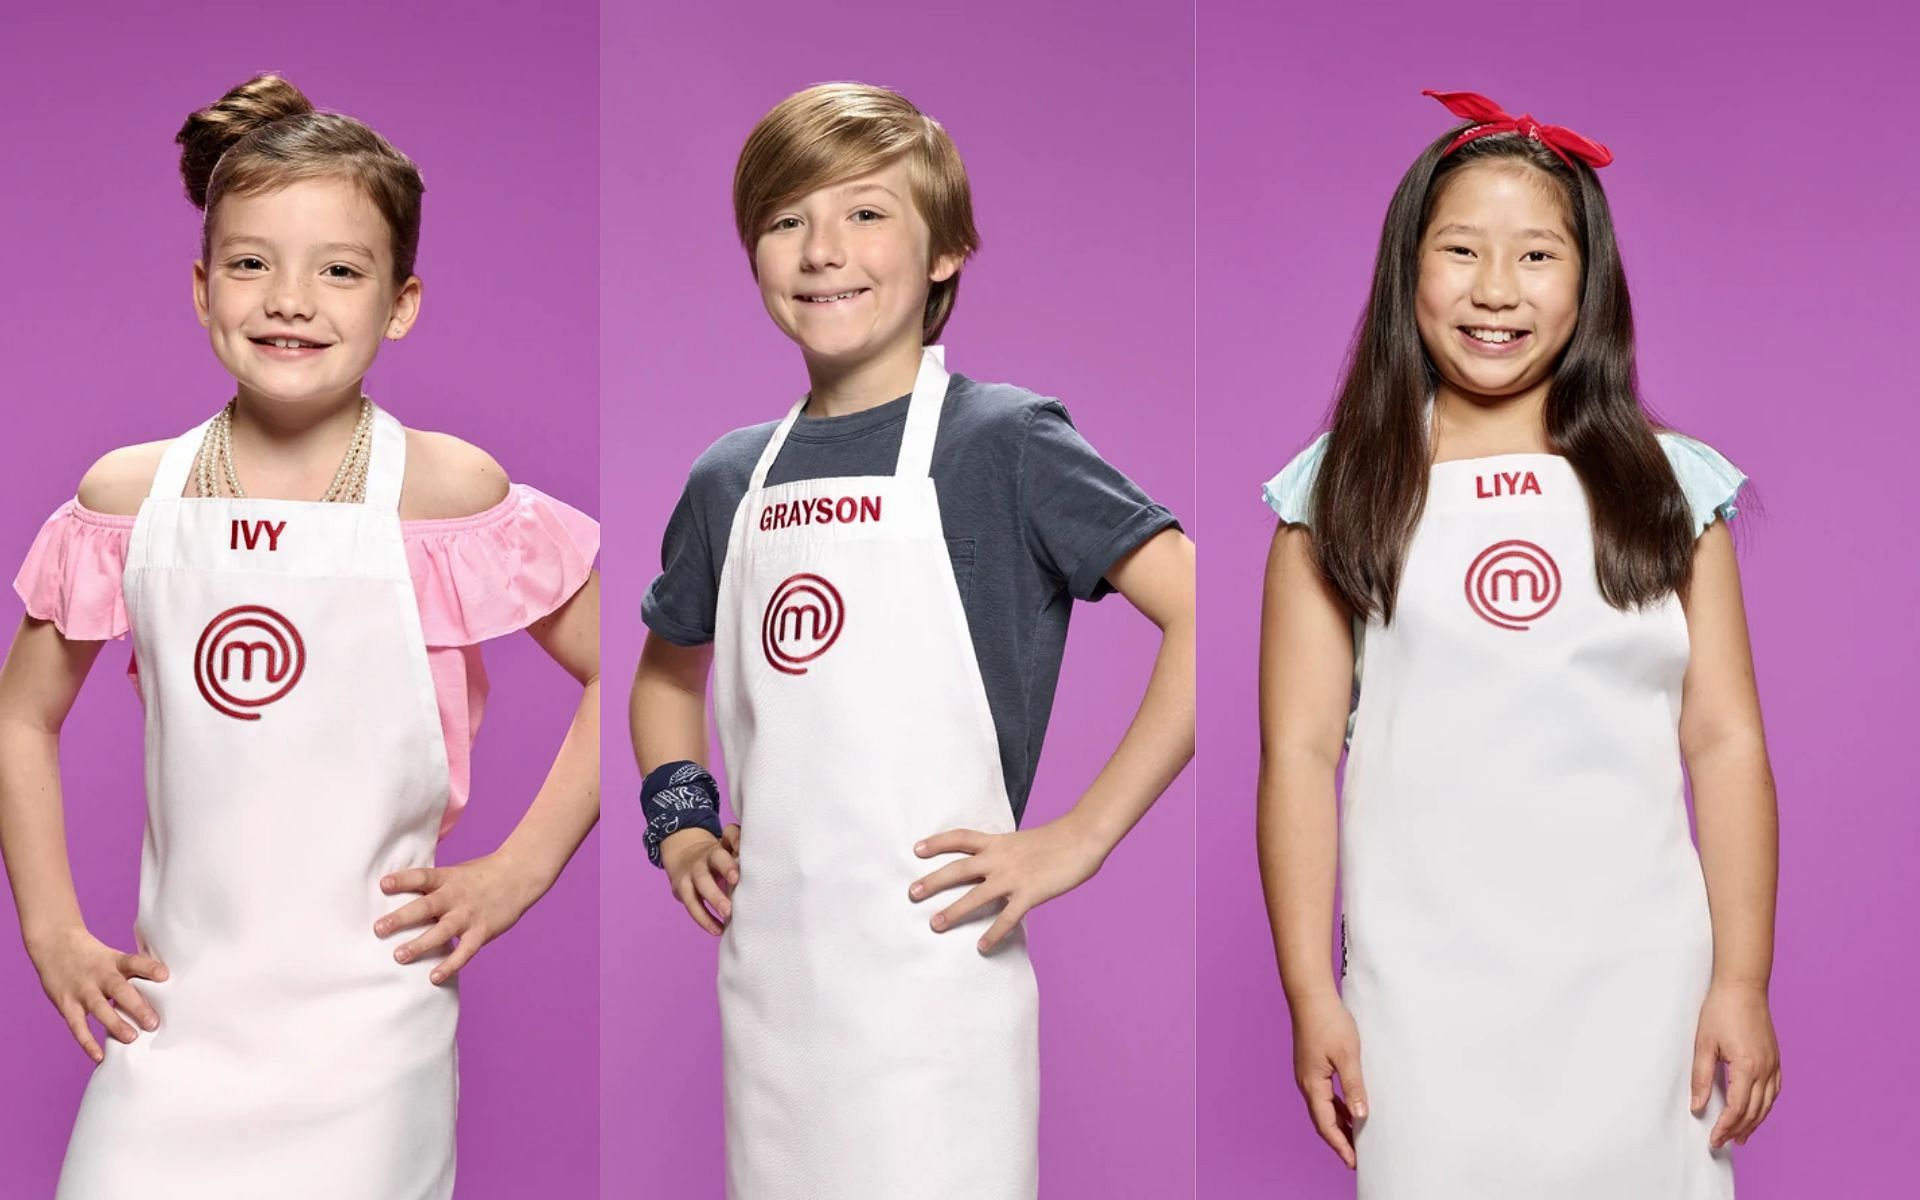 MasterChef Junior fans will have to wait until June 14 to see the semi-finalists competing for a spot in the finale (Images via Master Chef Fandom)